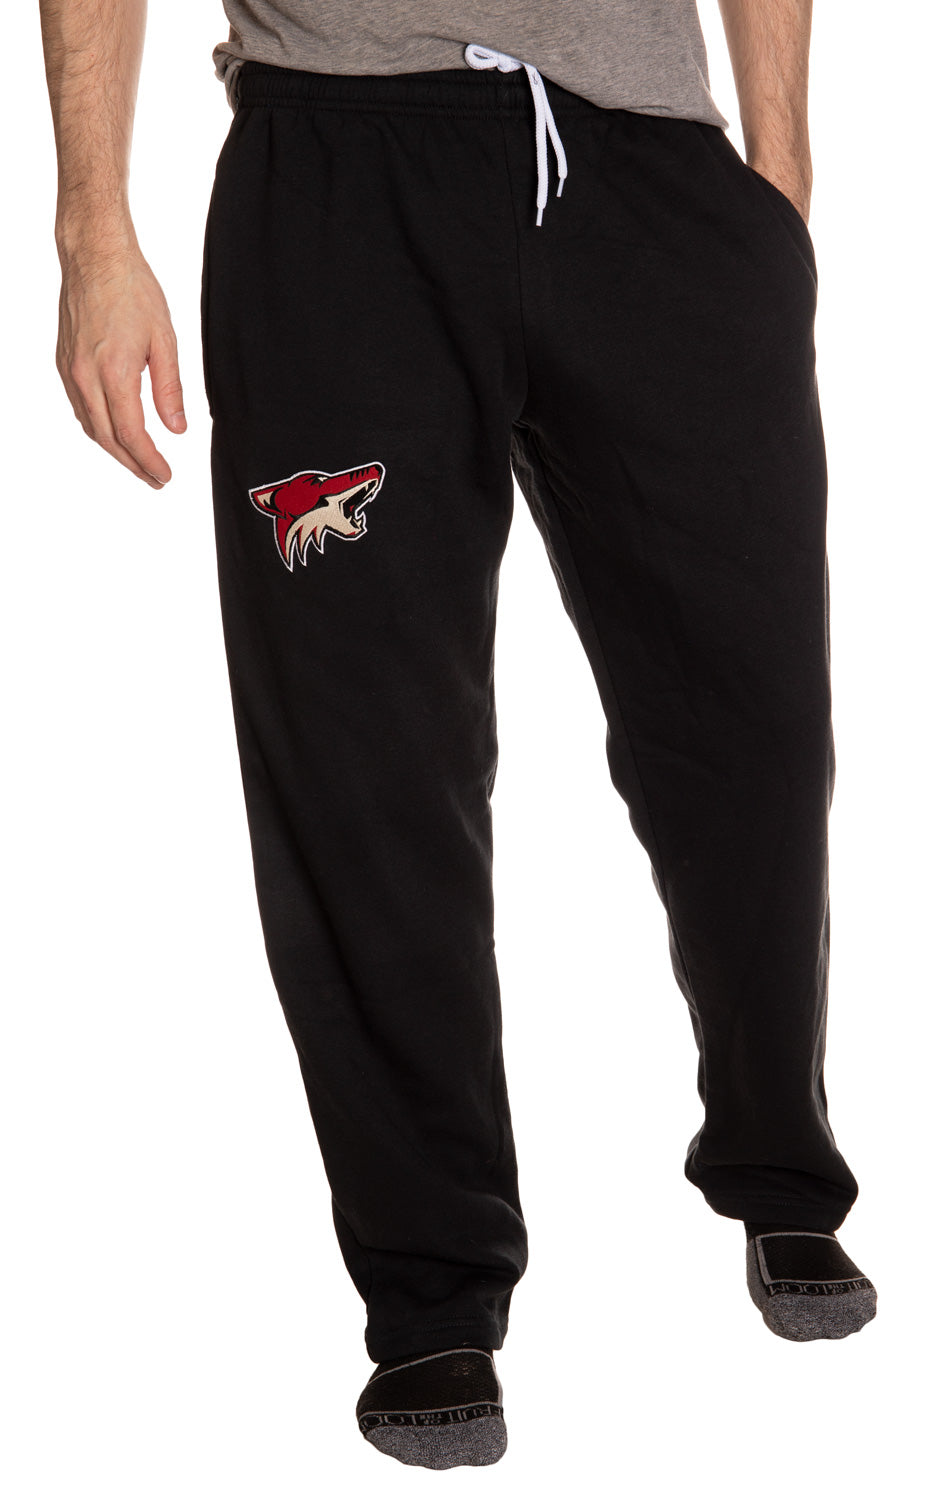 Arizona Coyotes Embroidered Logo Sweatpants Front View, Hand in Pocket